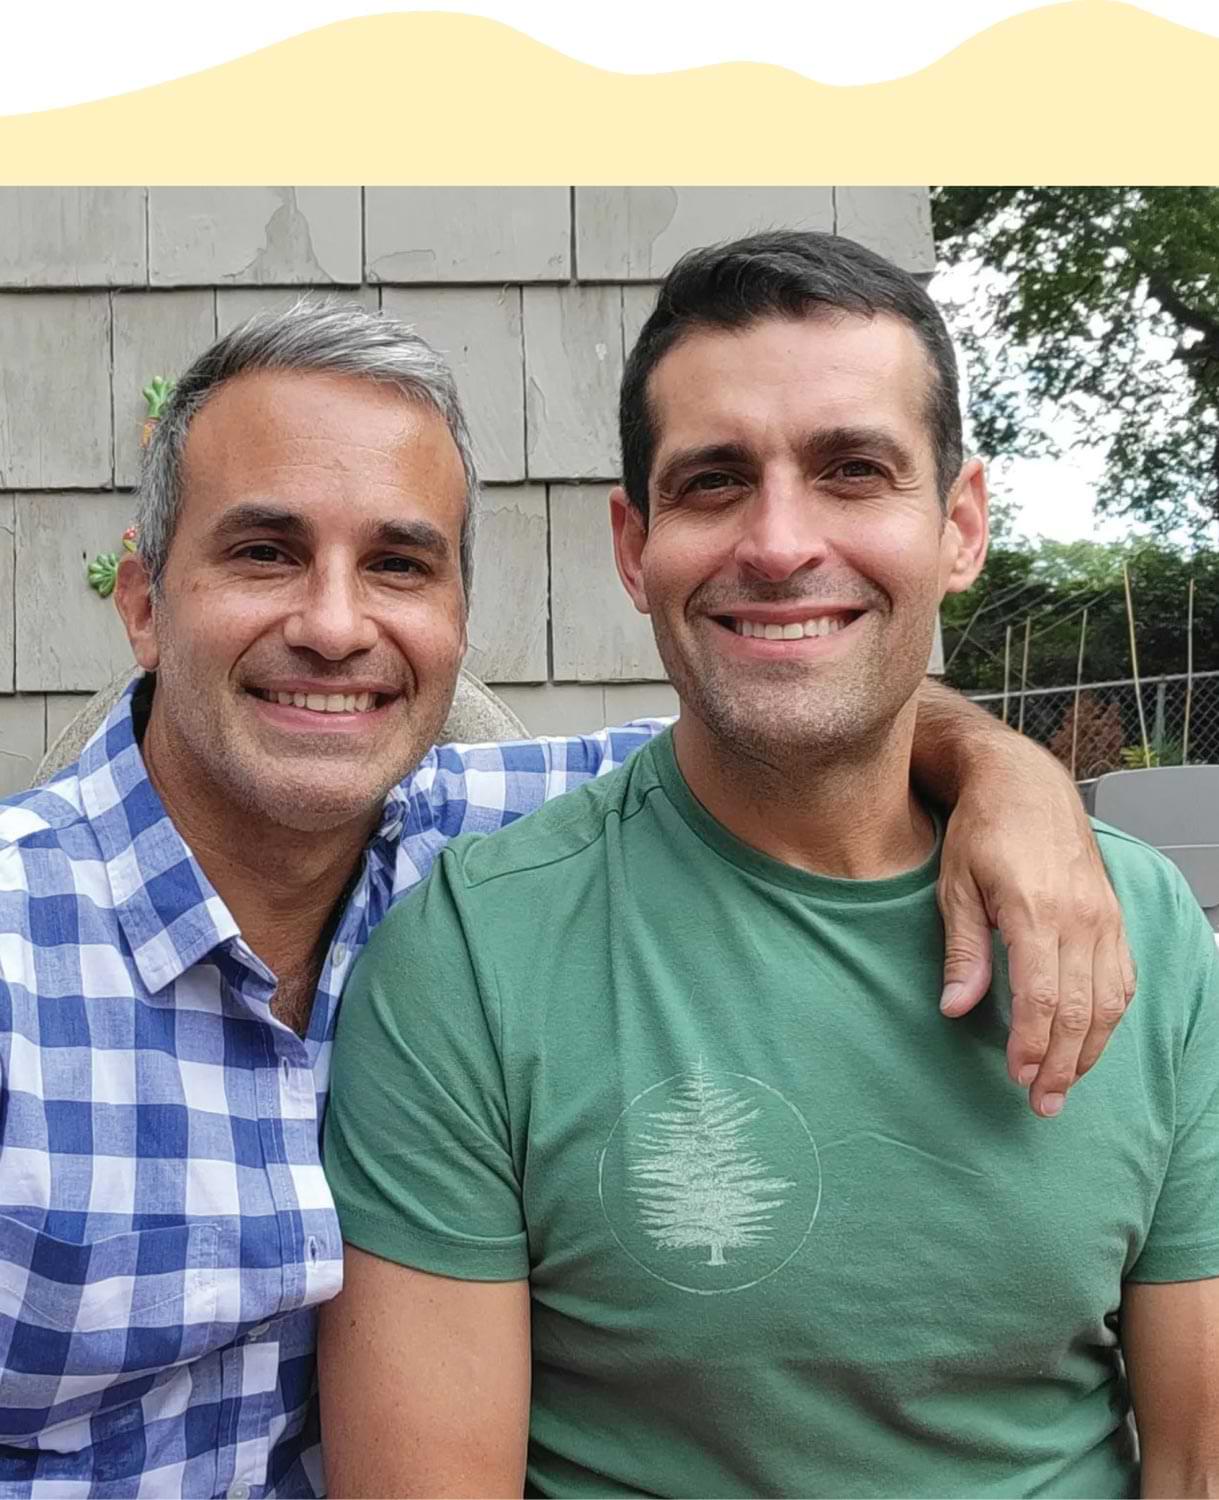 Dr. Omar Farias photographed with his husband standing outside a house, both smile with his husband arms around the doctors shoulder